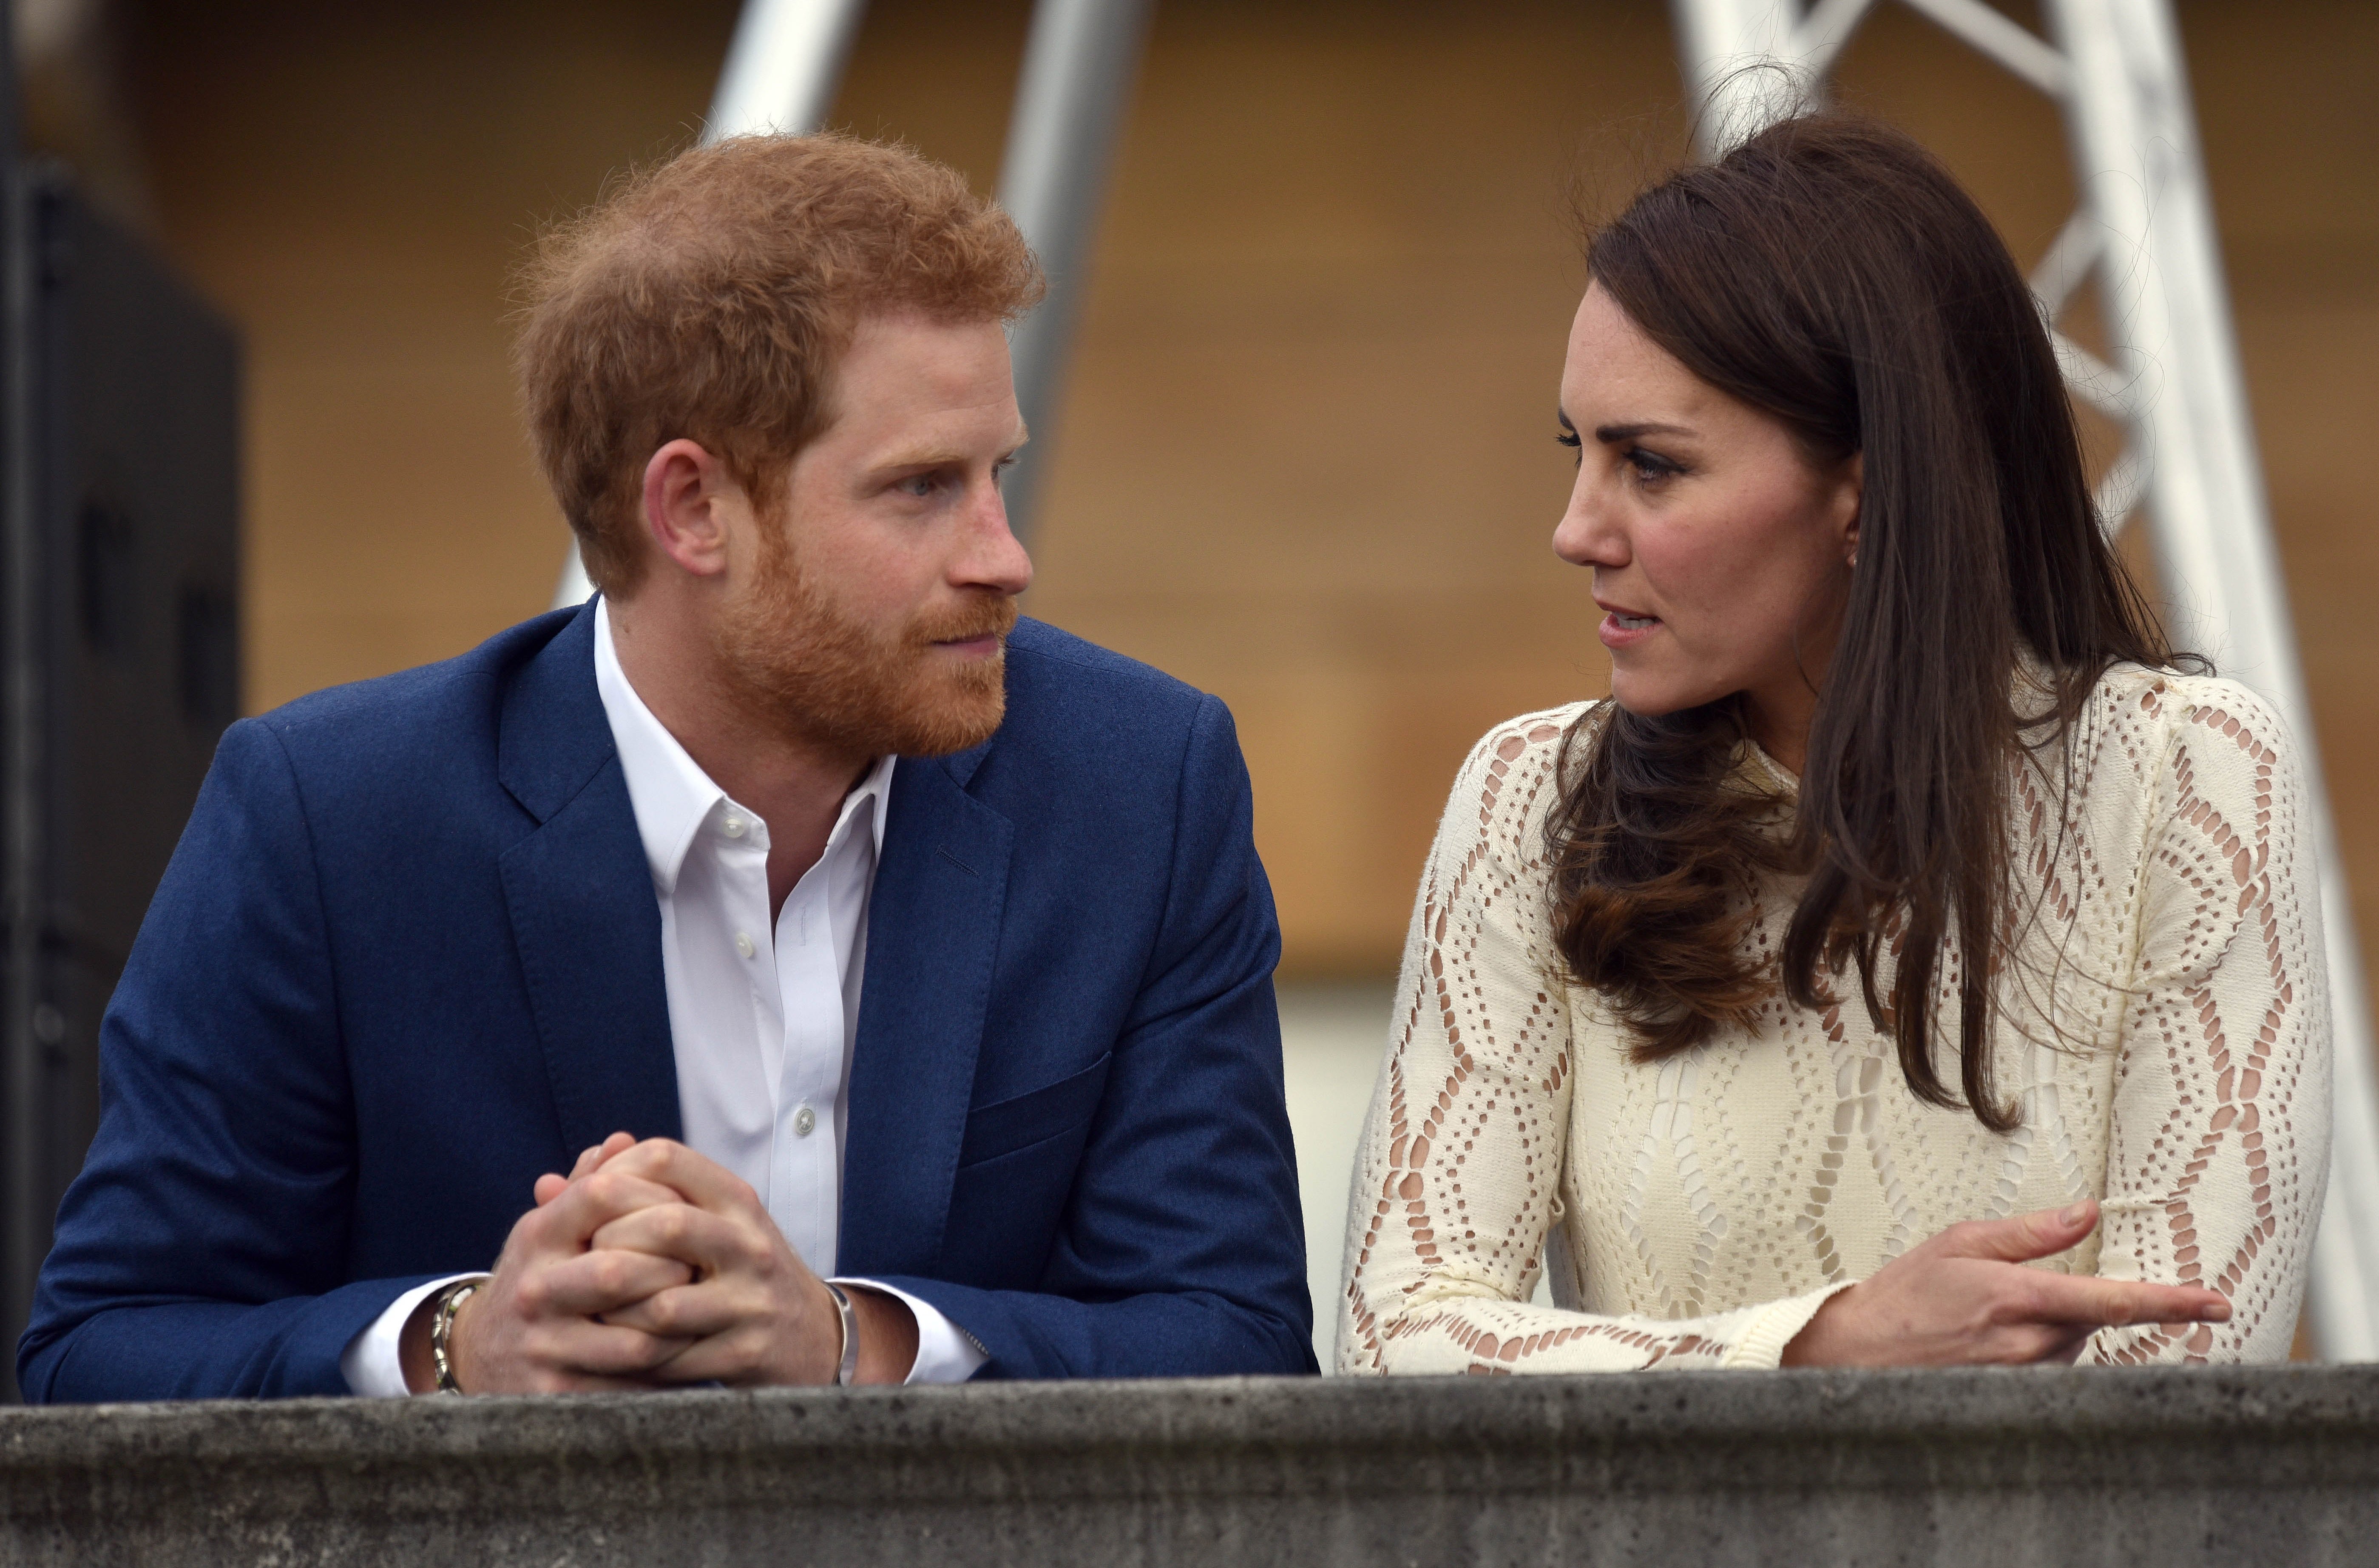 Kate Middleton and Prince Harry pictured in conversation at a tea party in the grounds of Buckingham Palace on May 13, 2017 in London, England. | Source: Getty Images